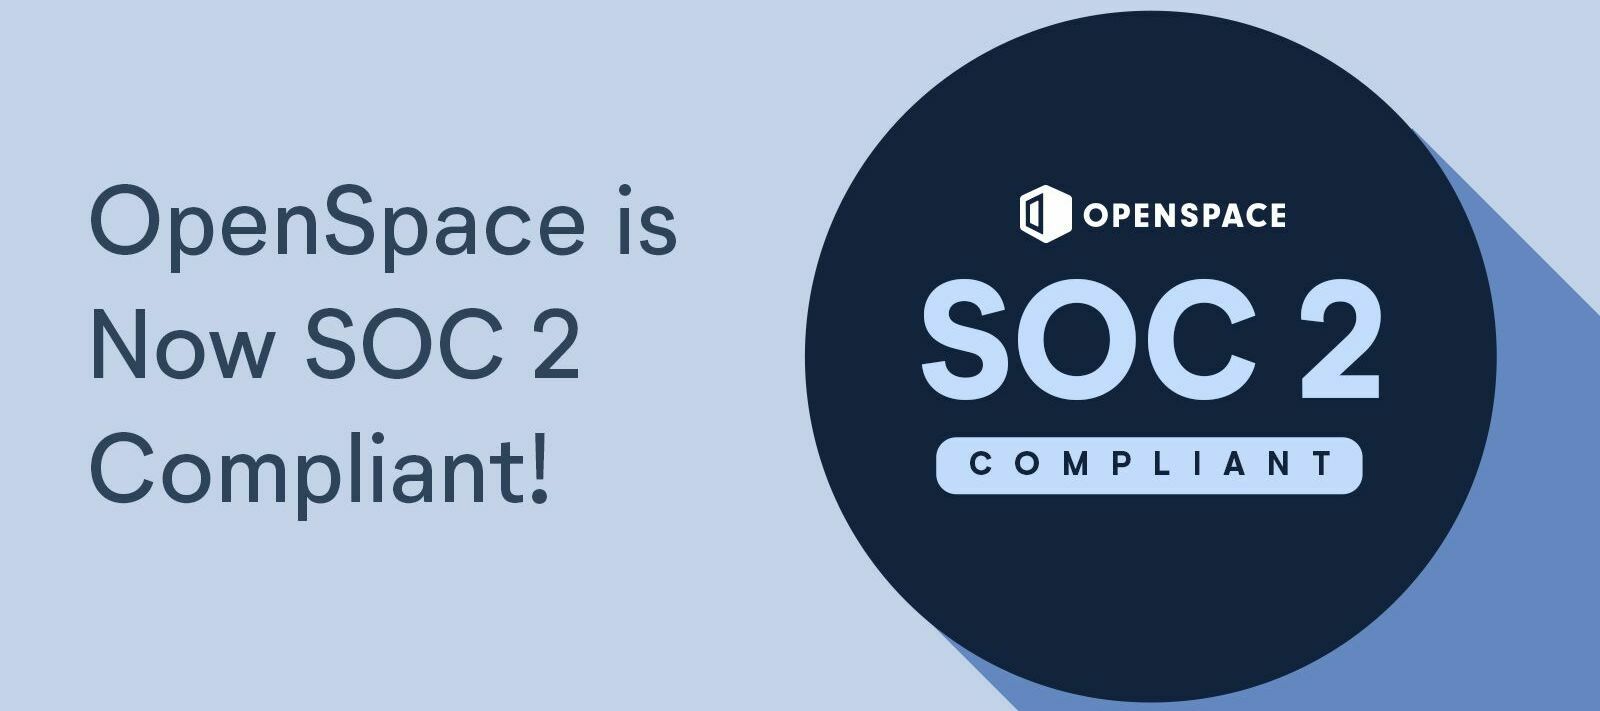 OpenSpace is Now SOC 2 Compliant!